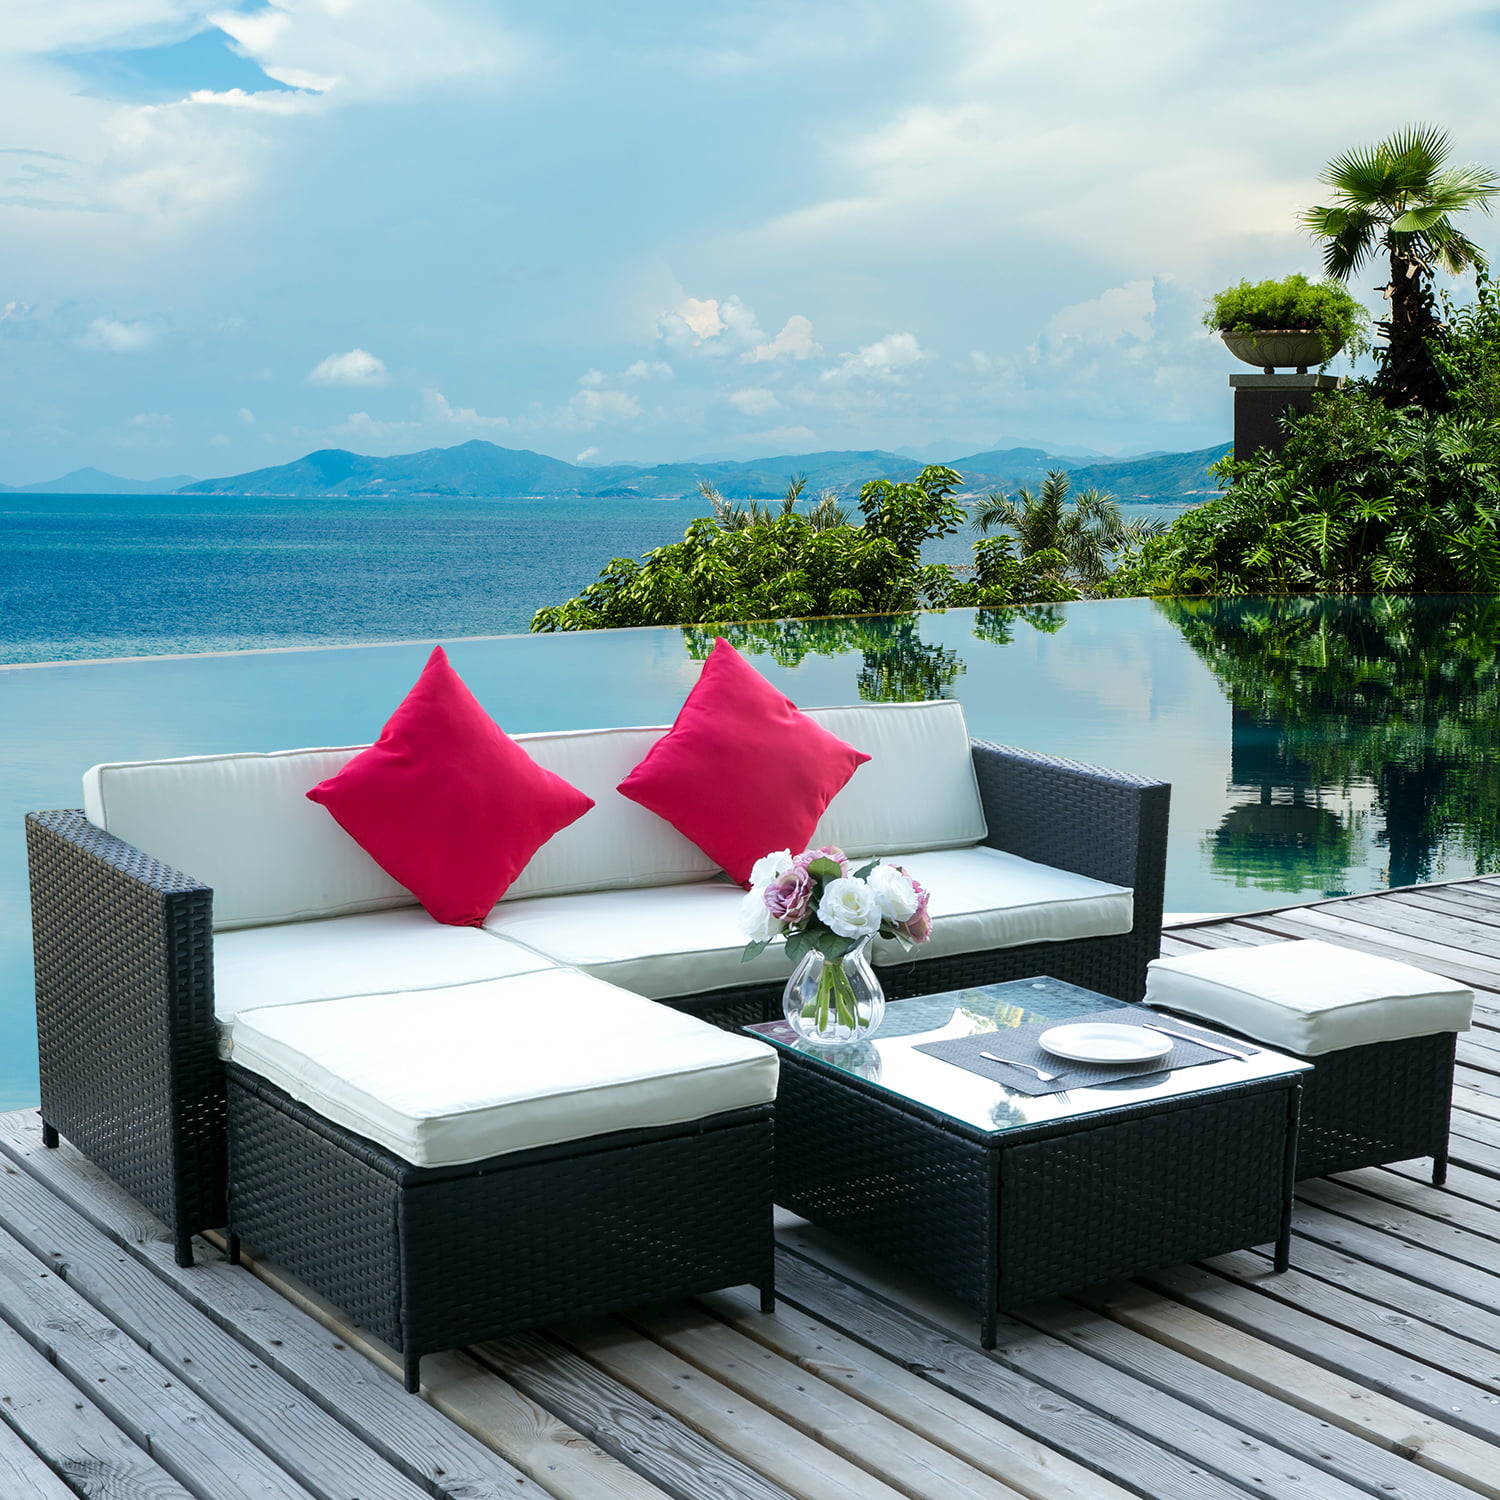 Clearance! 6PCS Outdoor Patio Furniture, All-Weather Wicker Patio Set, Rattan Sofa Set for ...